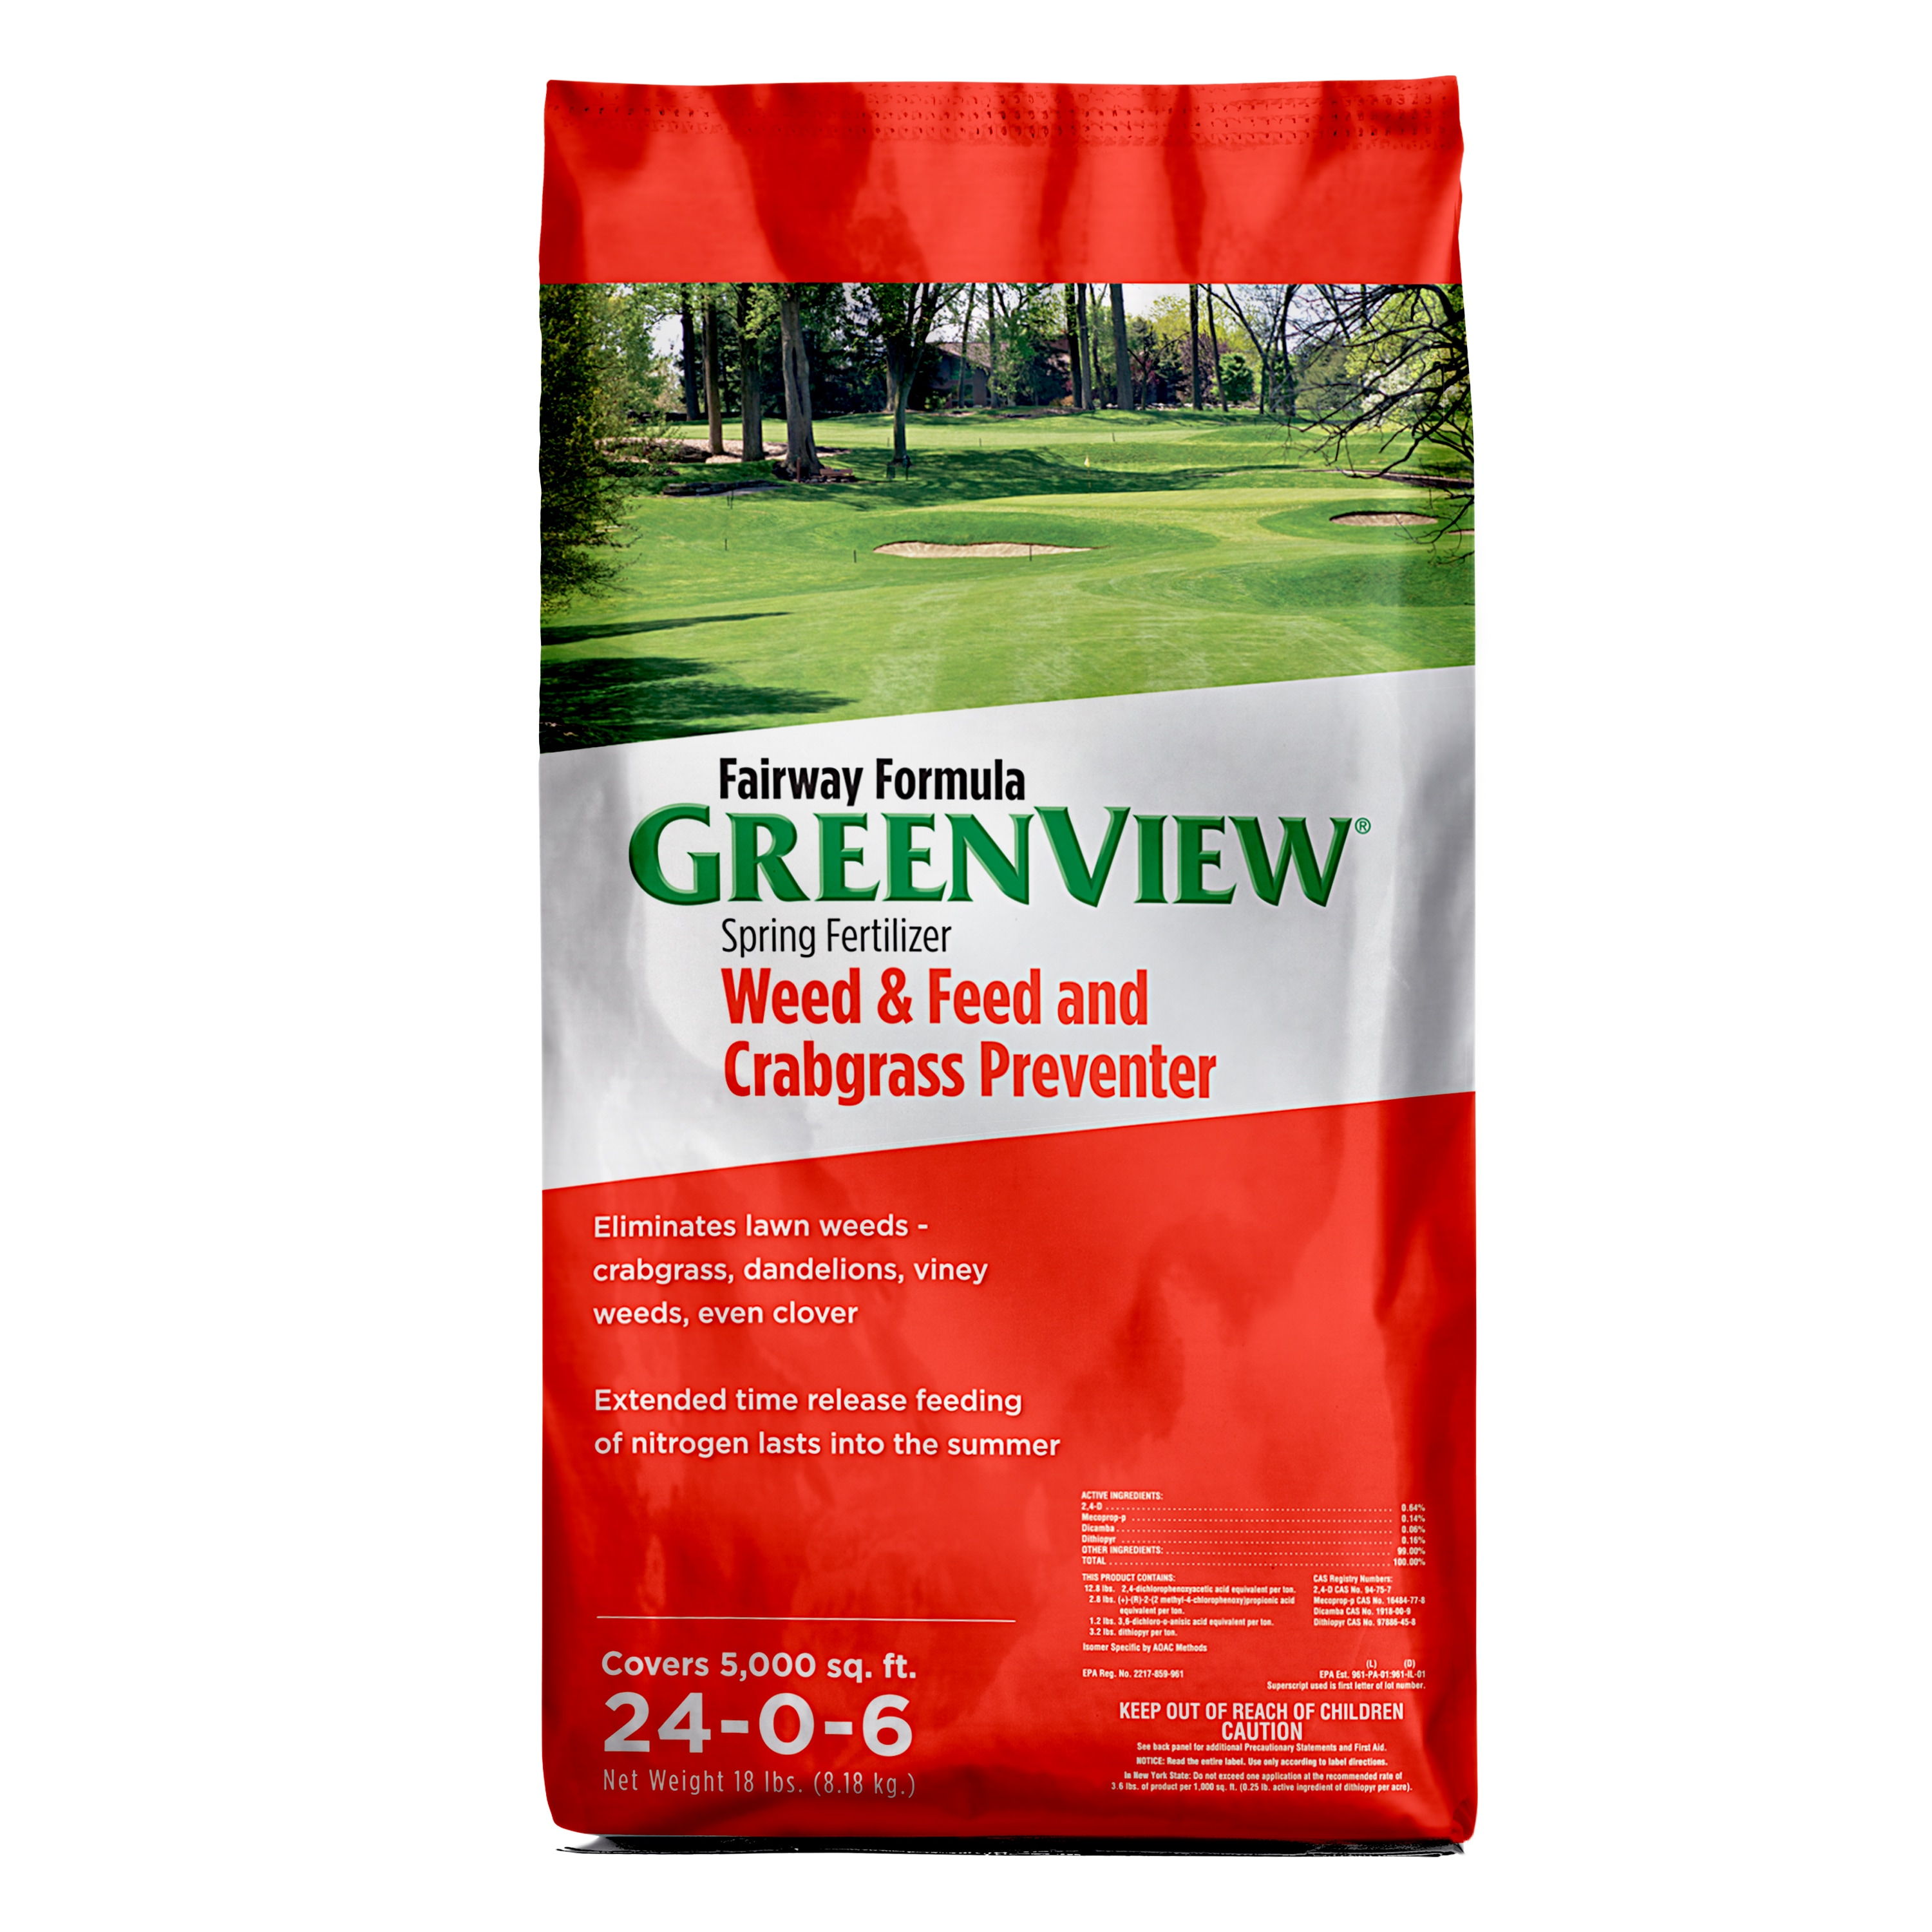 BioAdvanced 3-In-1 for southern lawns 12.5-lb 5000-sq ft 35-0-3